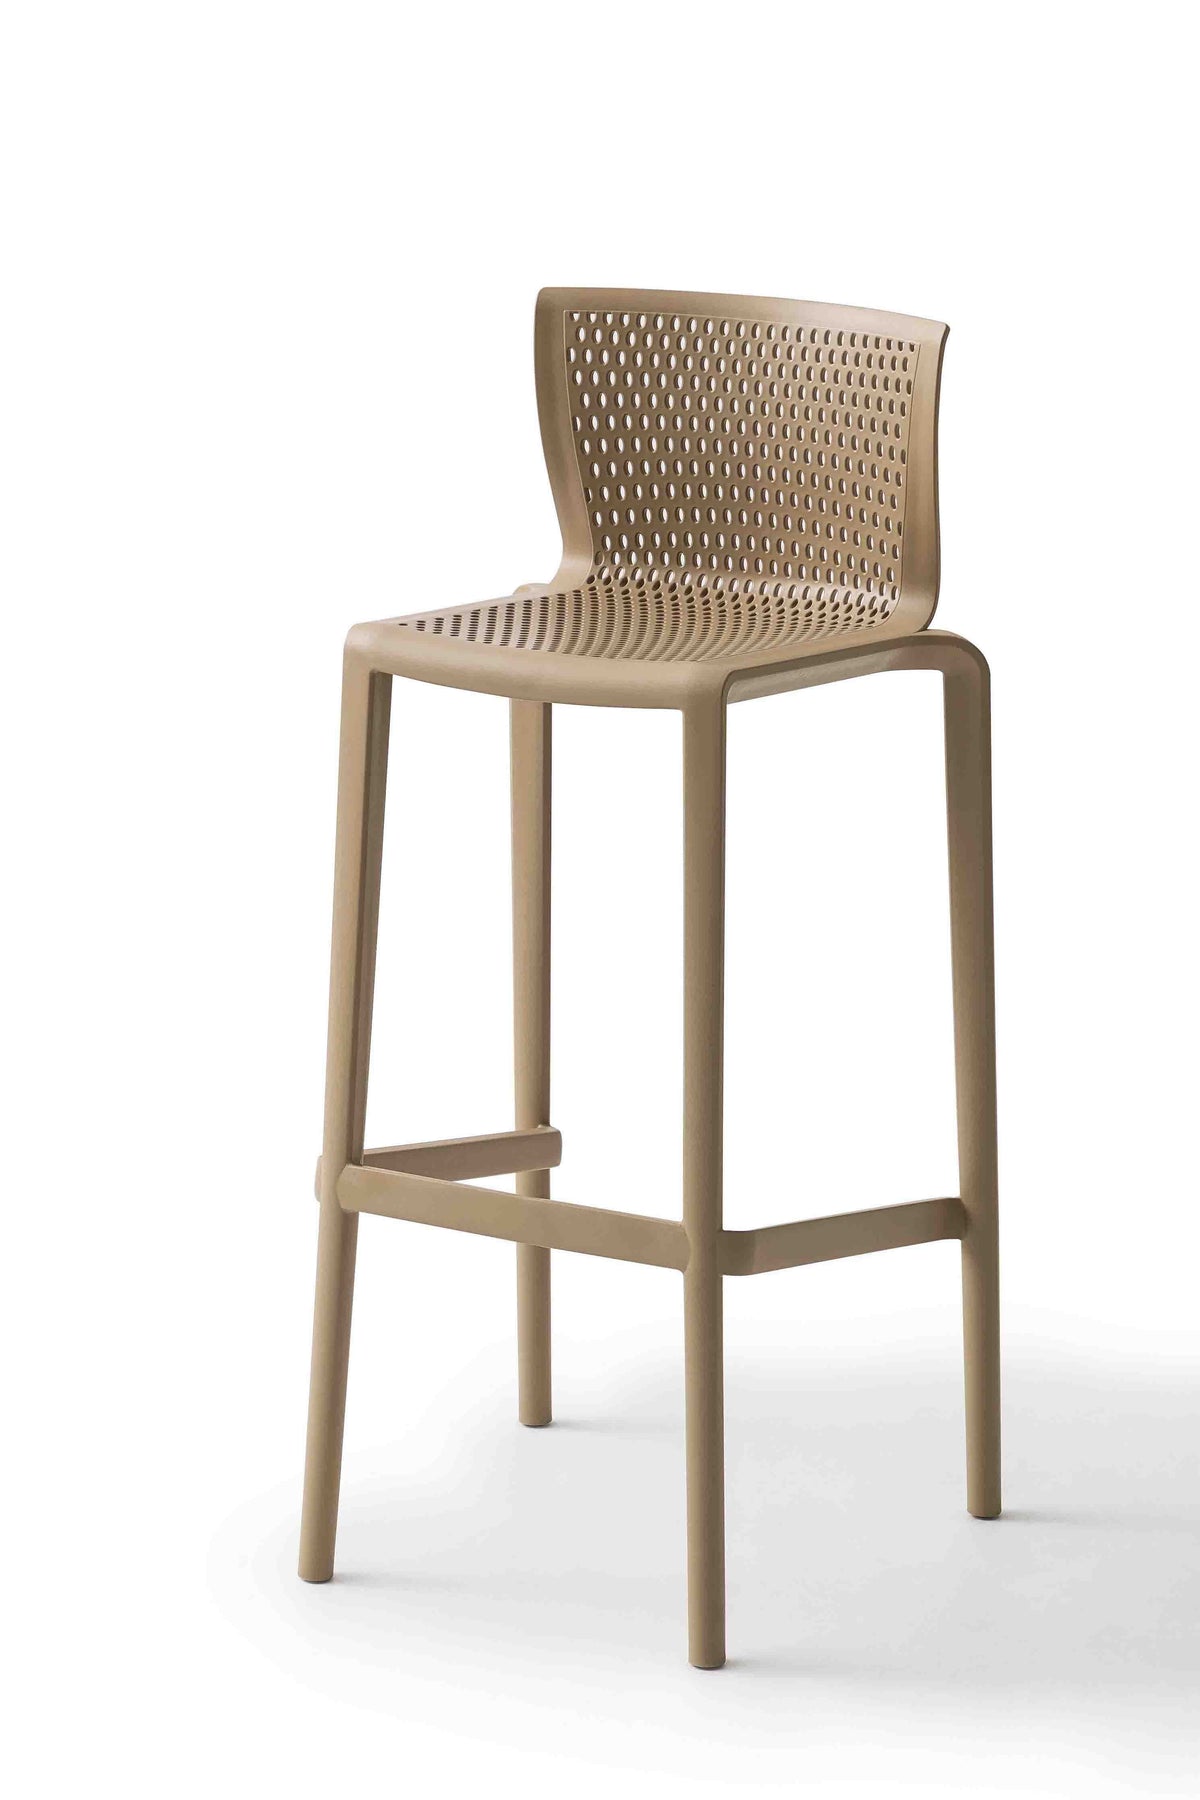 Spyker High Stool-Gaber-Contract Furniture Store